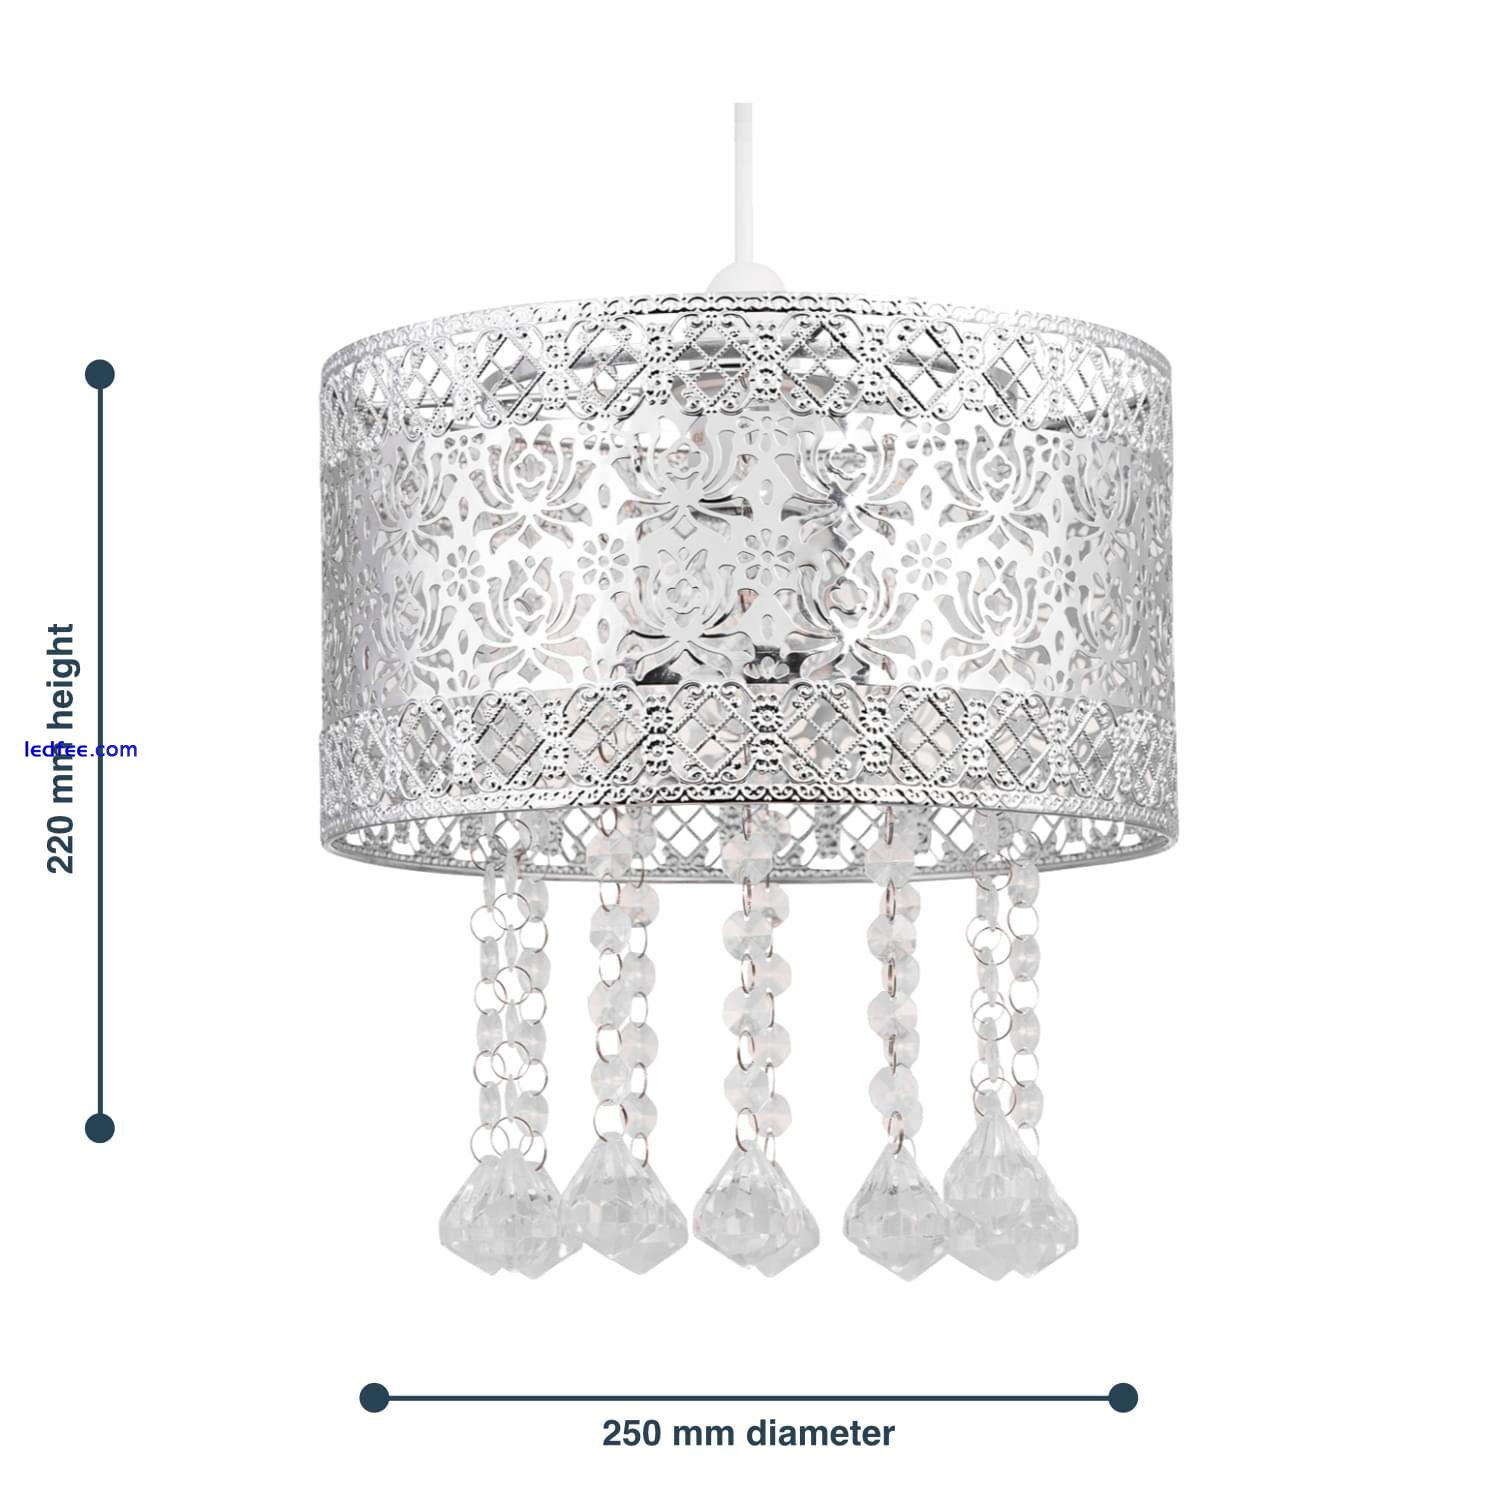 Modern Pair of Chrome Metal Jewelled Easy Fit Ceiling Light Shade Chandeliers 3 